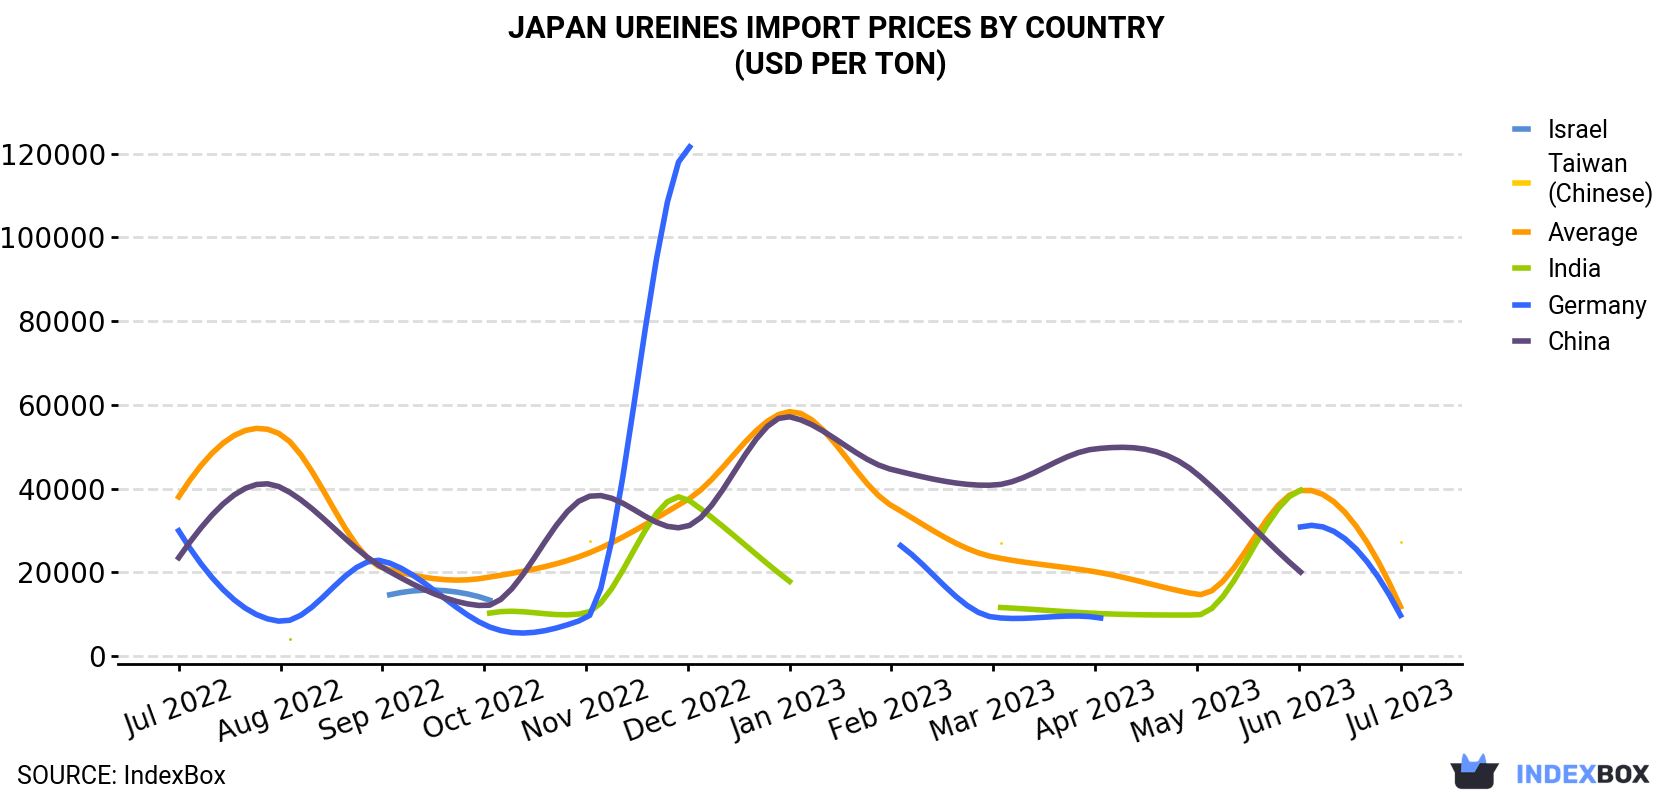 Japan Ureines Import Prices By Country (USD Per Ton)